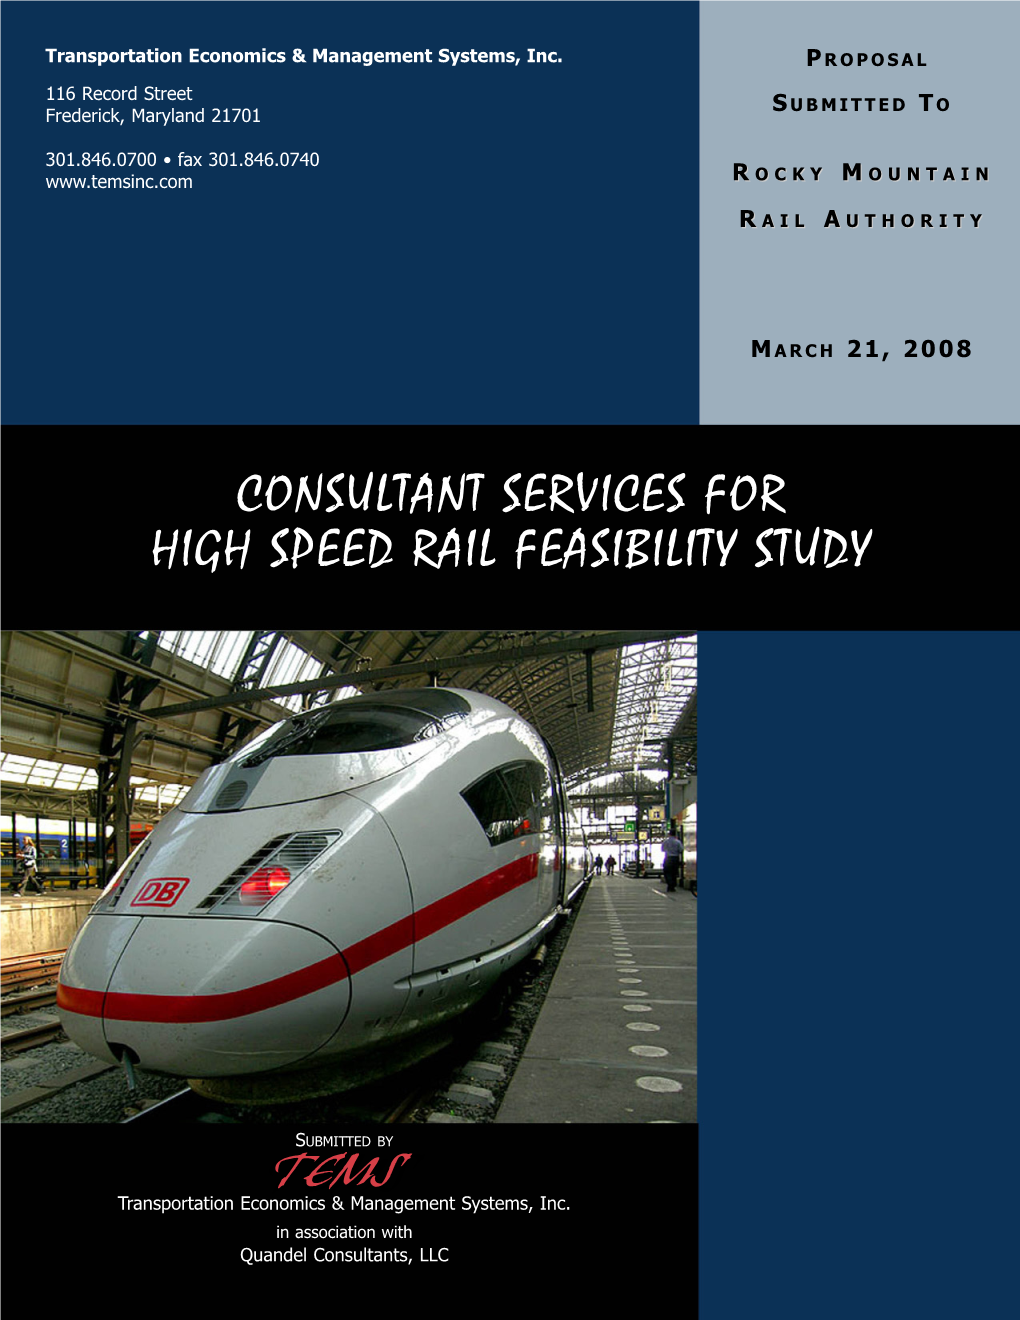 Consultant Services for High Speed Rail Feasibility Study